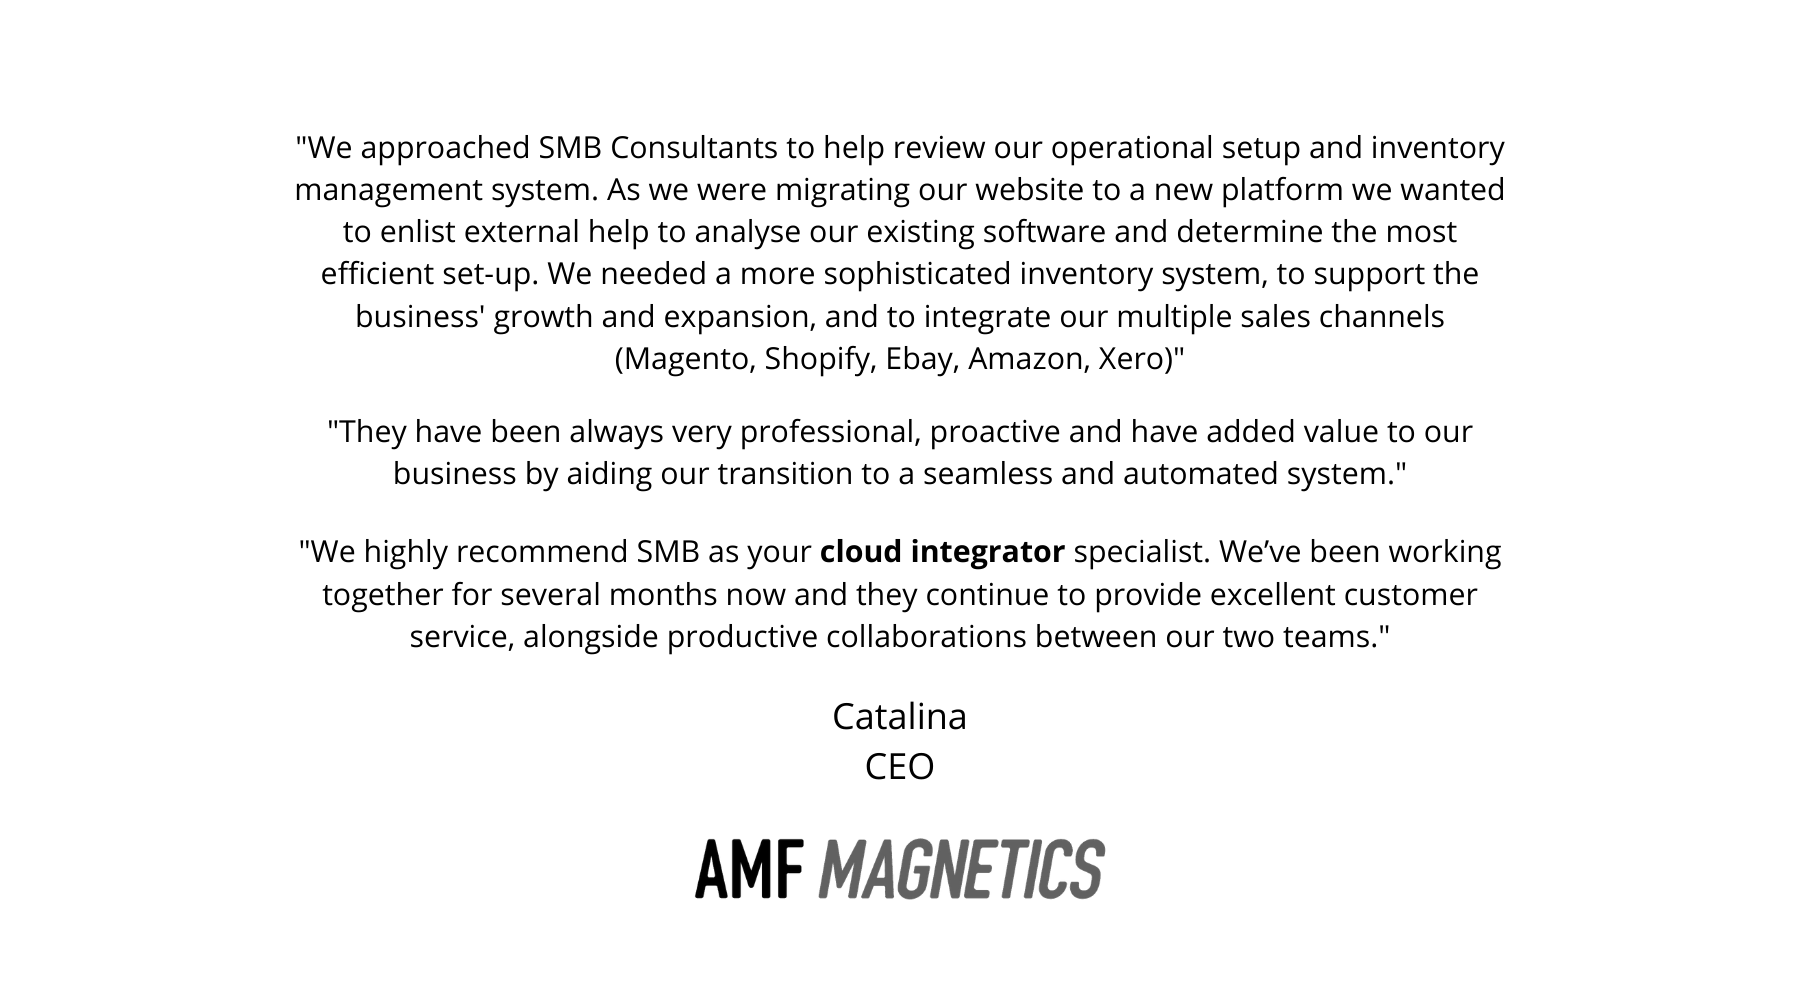 SMB Consultants Cloud Based App Integrators Business Consultants Customer Review AMF Magnetics